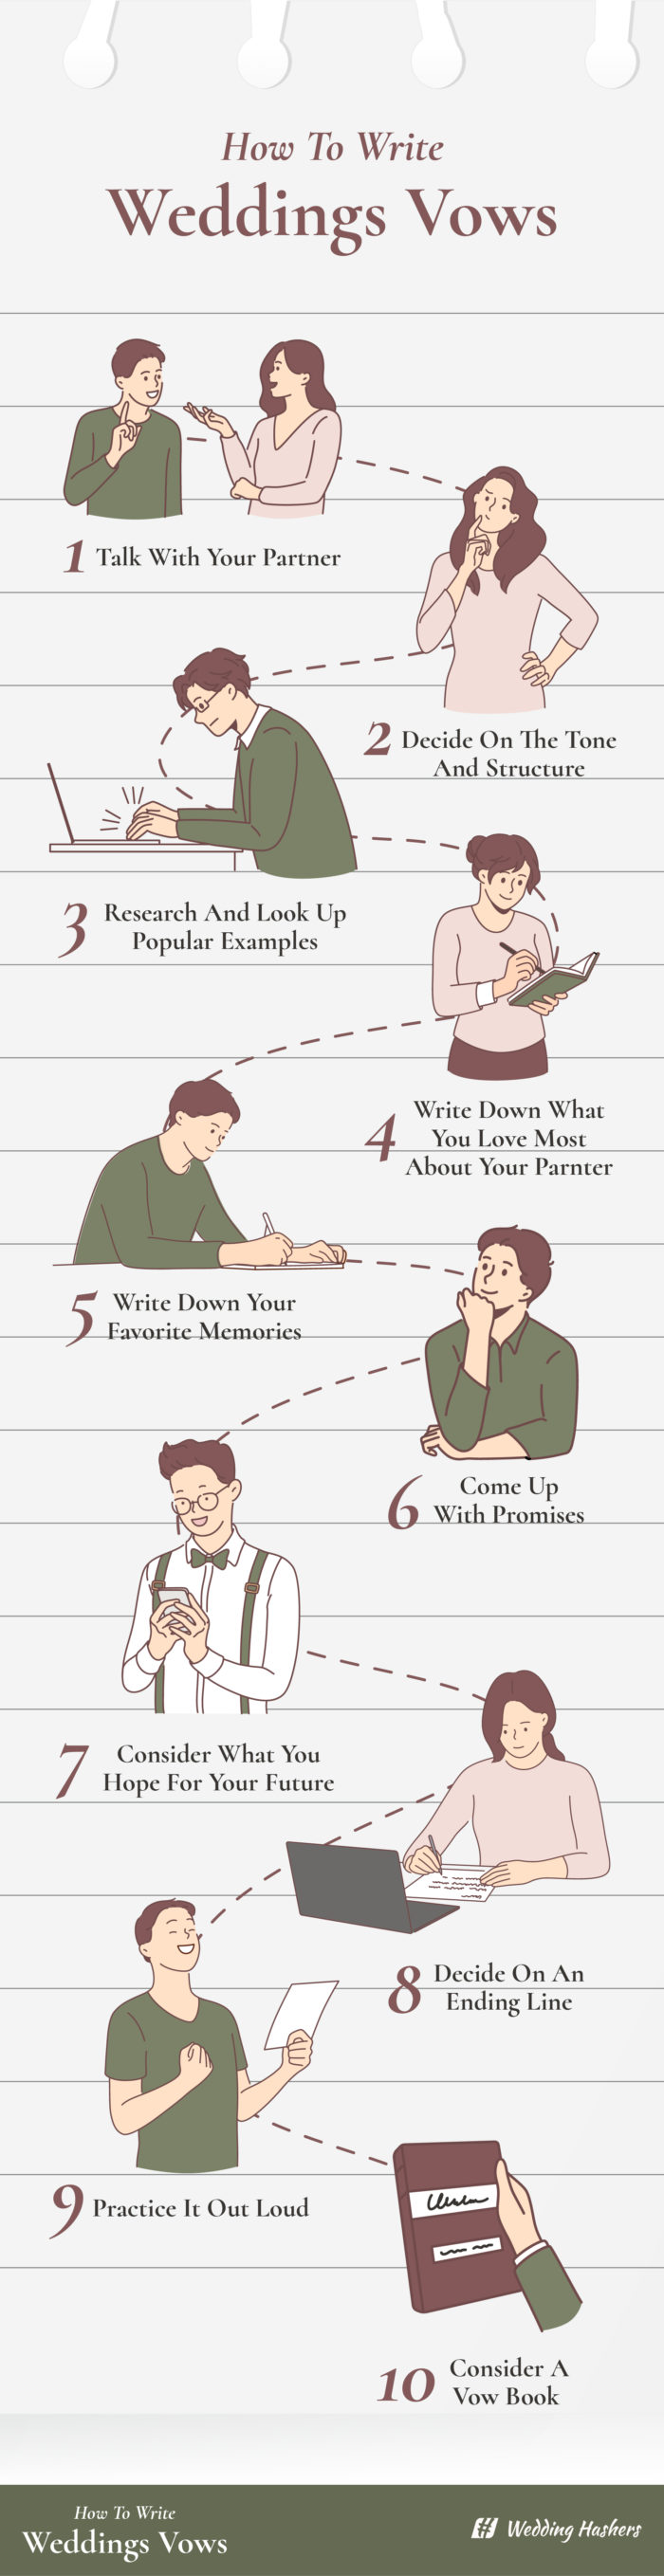 how to write wedding vows infographic